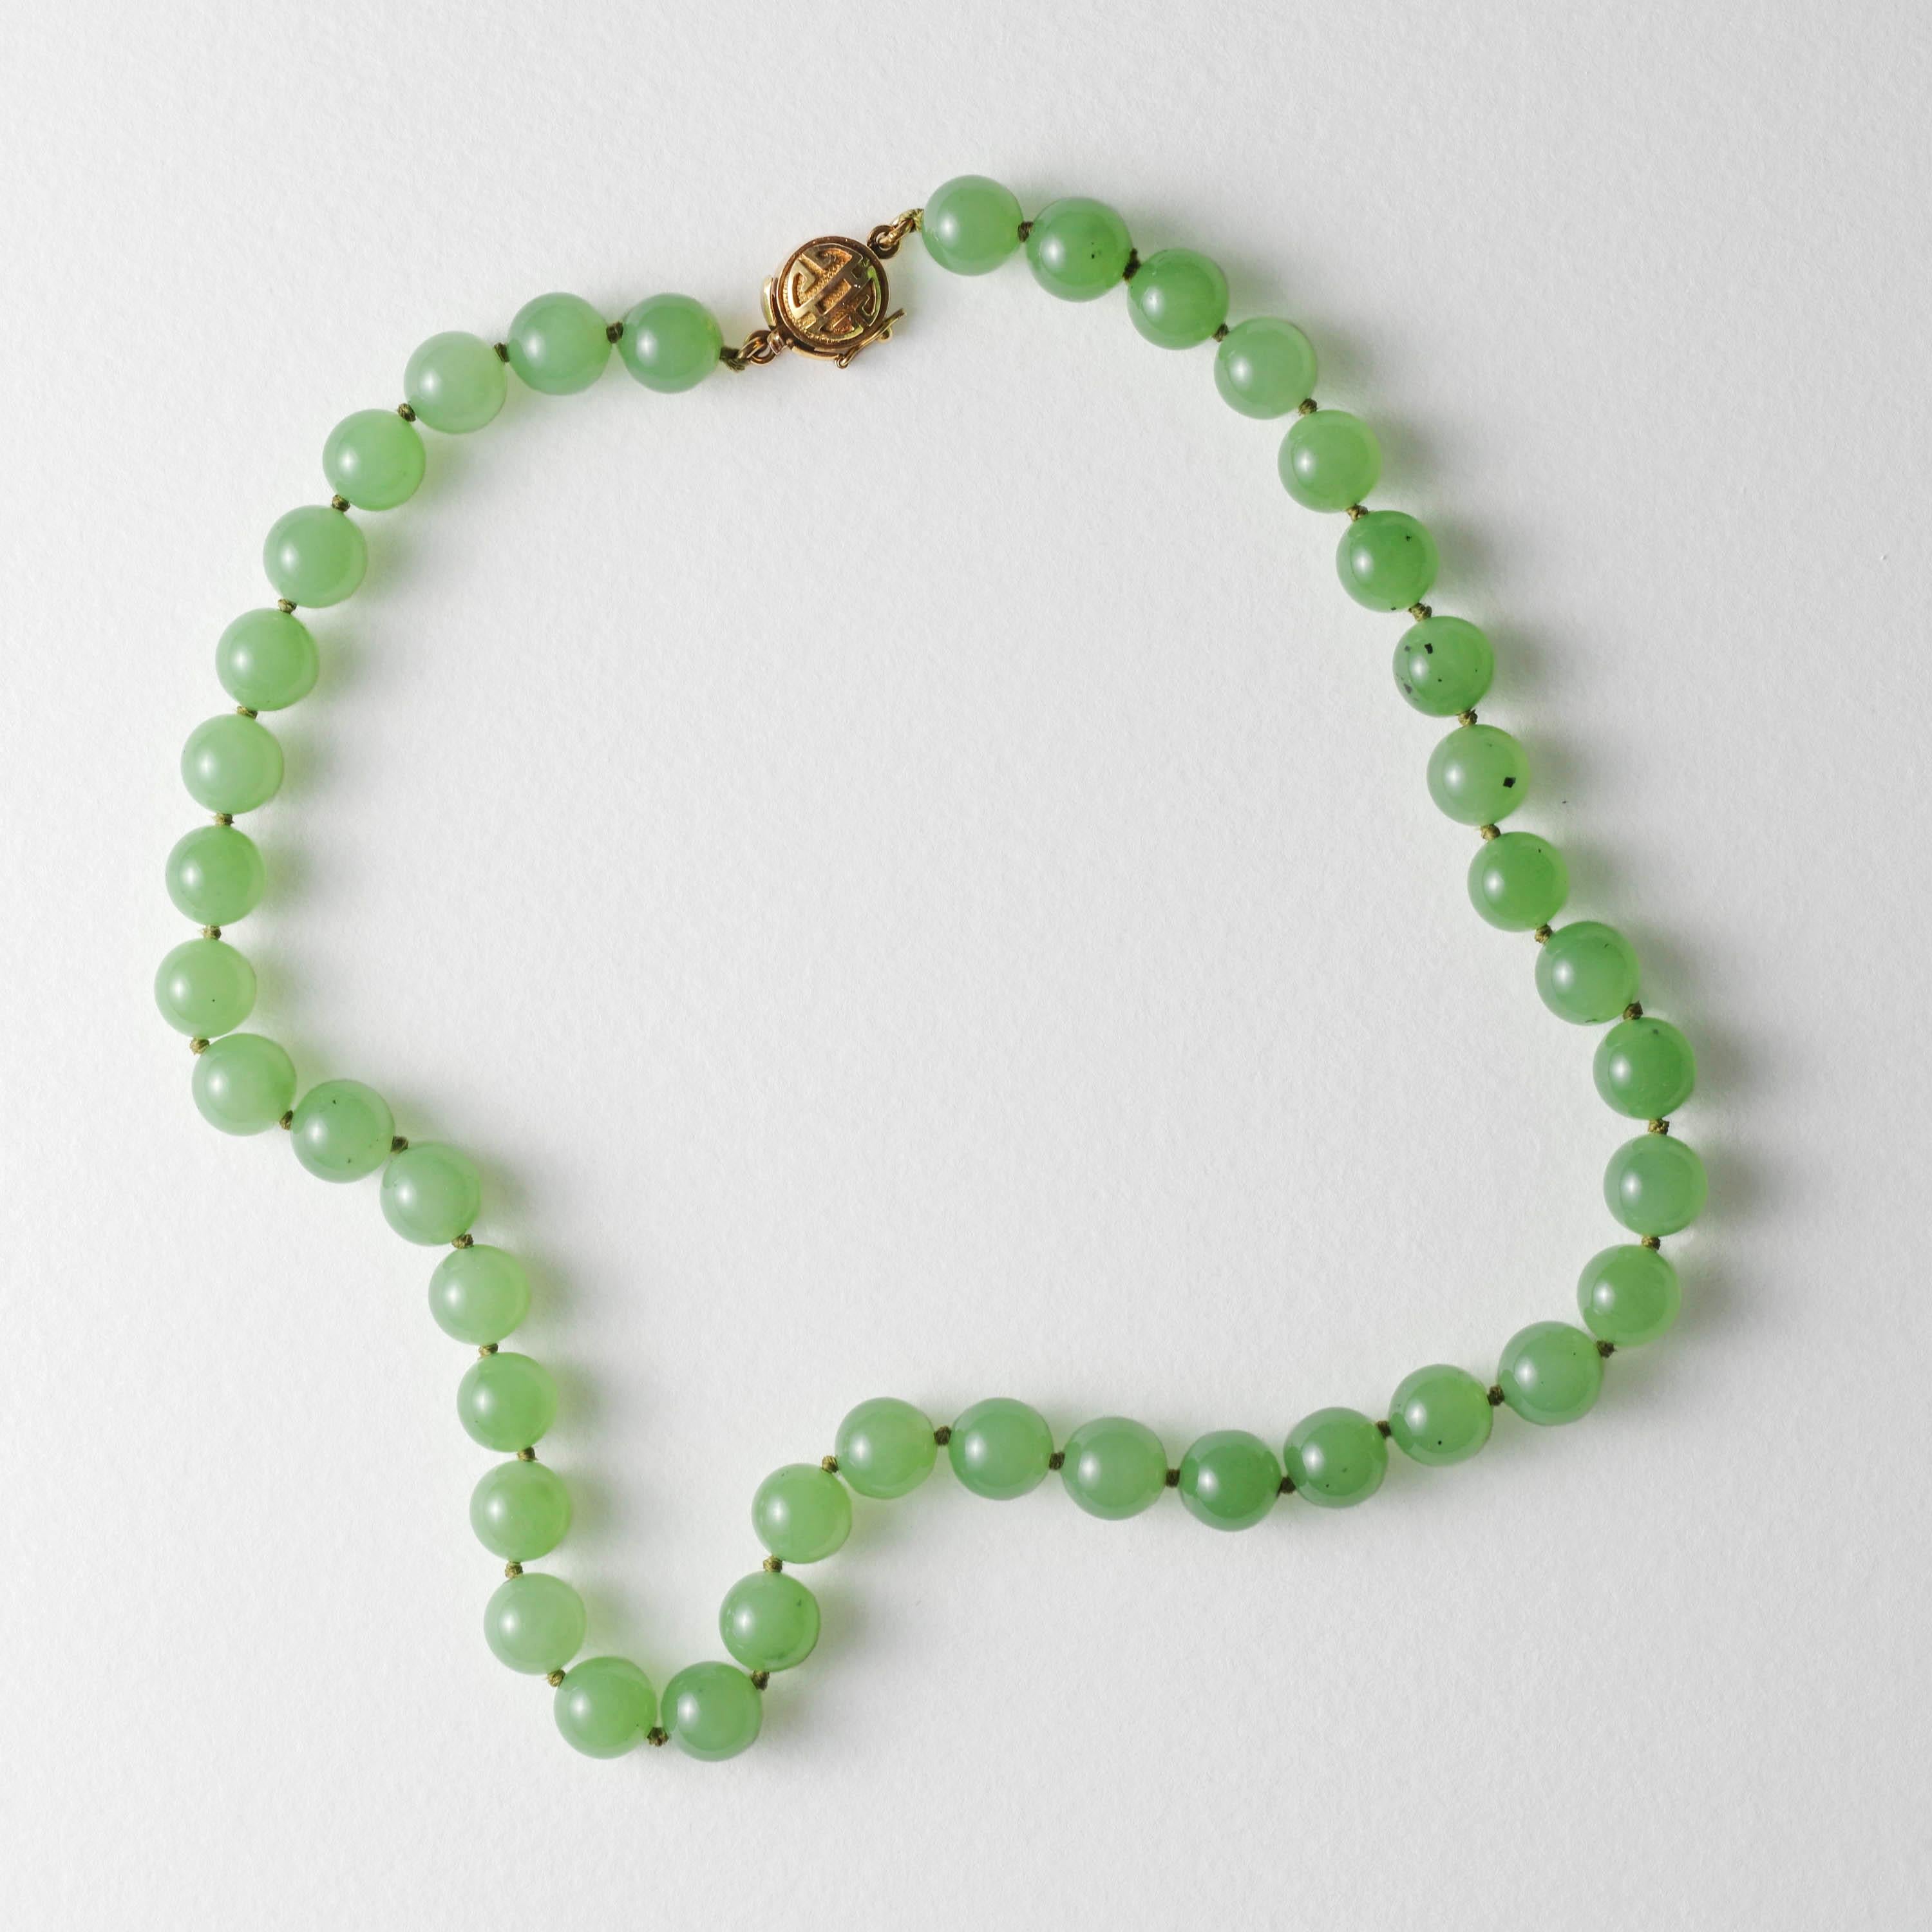 This is rare Gump's nephrite jade necklace from the Midcentury (circa 1960s) in an exceptionally translucent light chartreuse green. Indeed, the hand-carved and polished beads are so highly translucent they look to be made of glass. In fact,